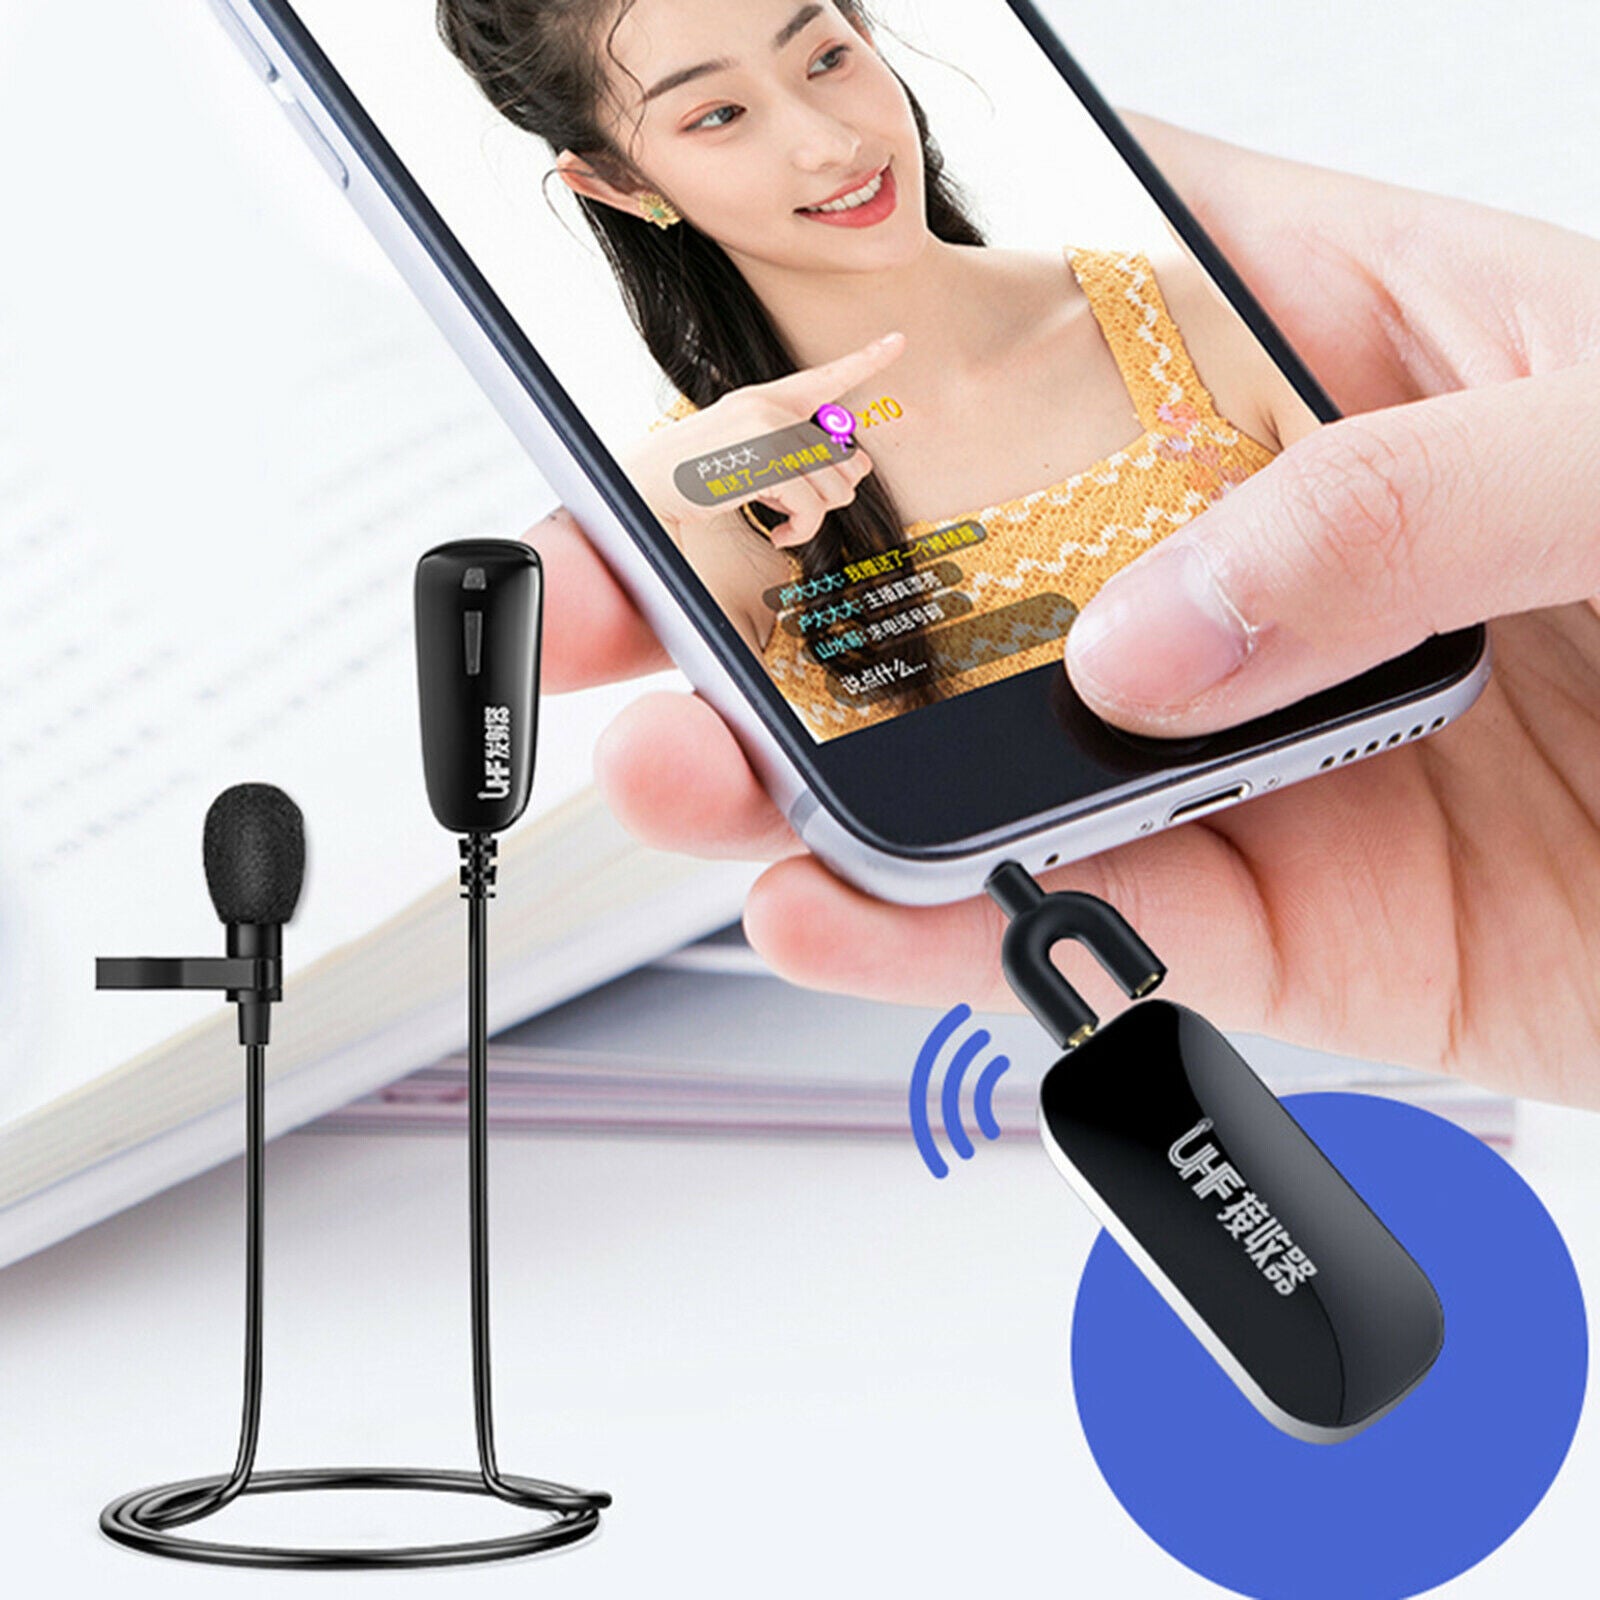 Portable UHF Wireless Lavalier Lapel Microphone Mic Transmitter & Receiver